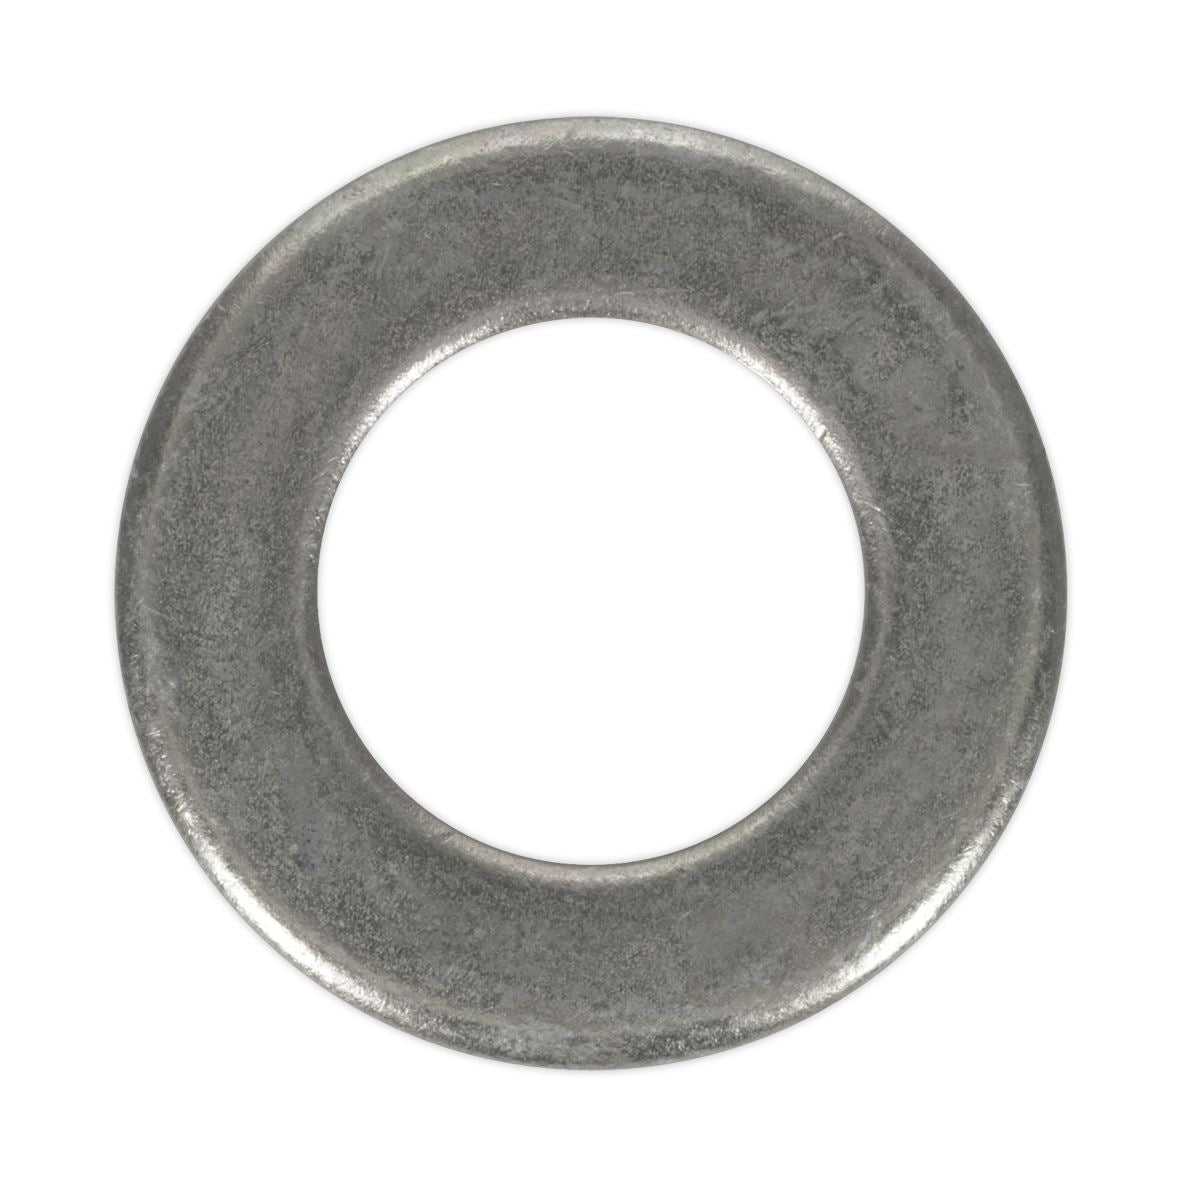 Sealey Flat Washer M16 x 34mm Form C Pack of 50